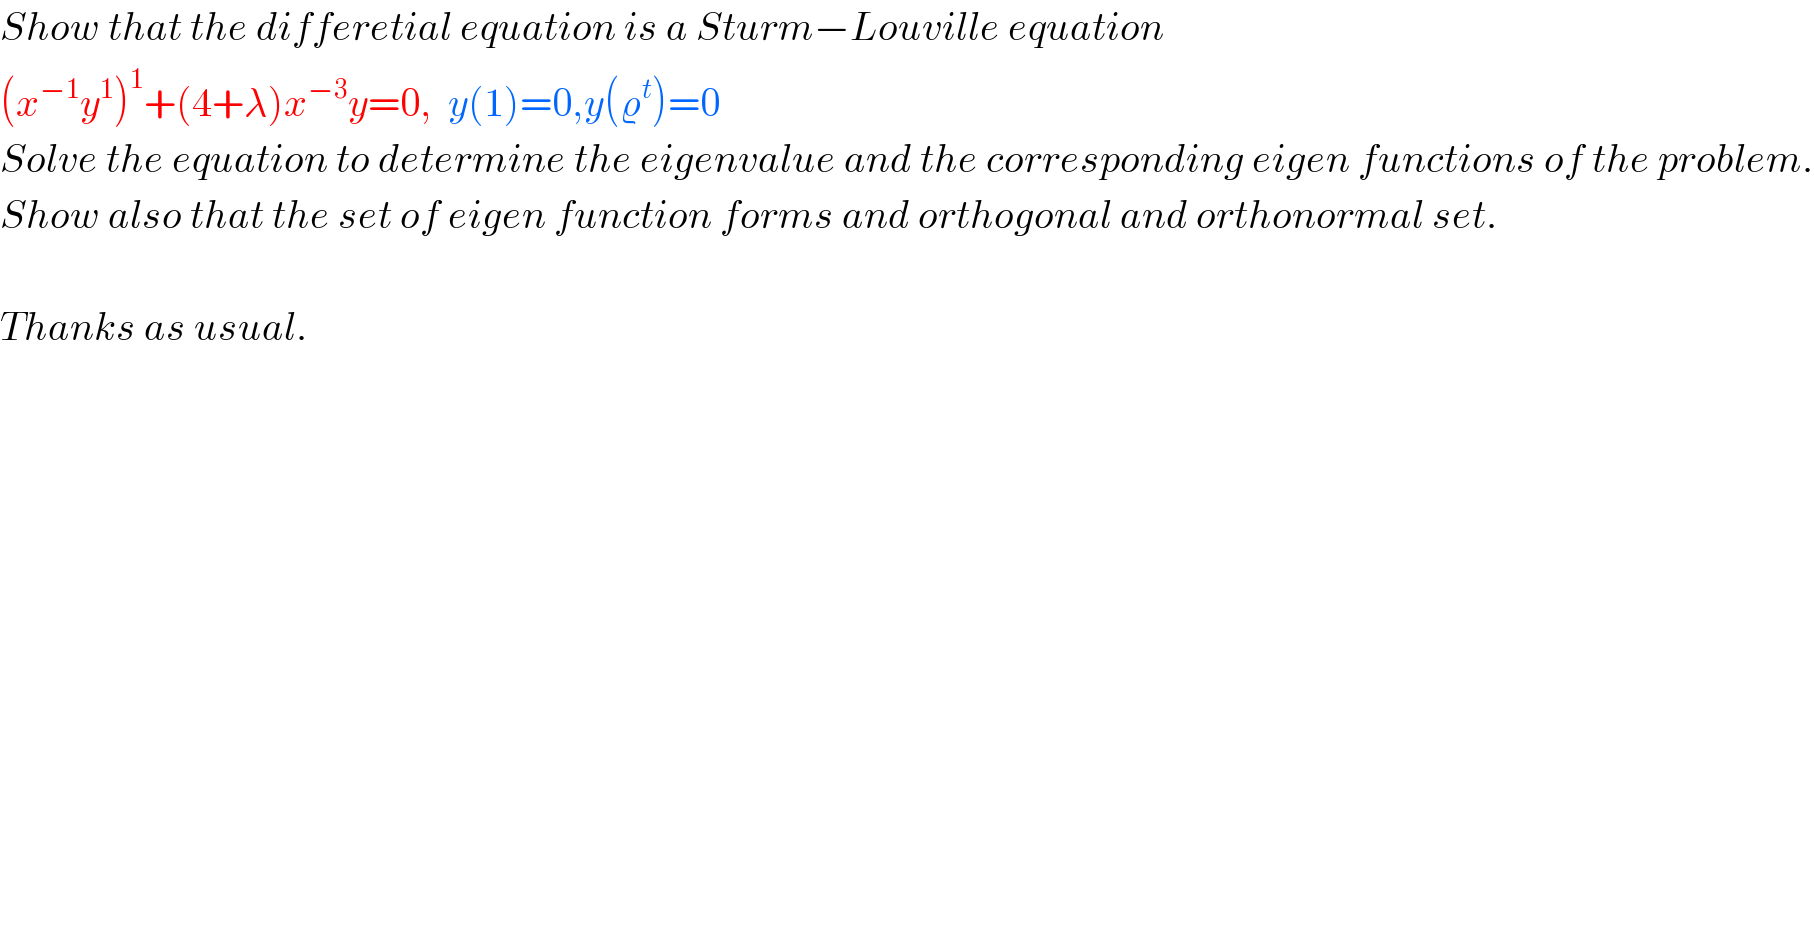 Show that the differetial equation is a Sturm−Louville equation  (x^(−1) y^1 )^1 +(4+λ)x^(−3) y=0,  y(1)=0,y(ϱ^t )=0  Solve the equation to determine the eigenvalue and the corresponding eigen functions of the problem.  Show also that the set of eigen function forms and orthogonal and orthonormal set.    Thanks as usual.  